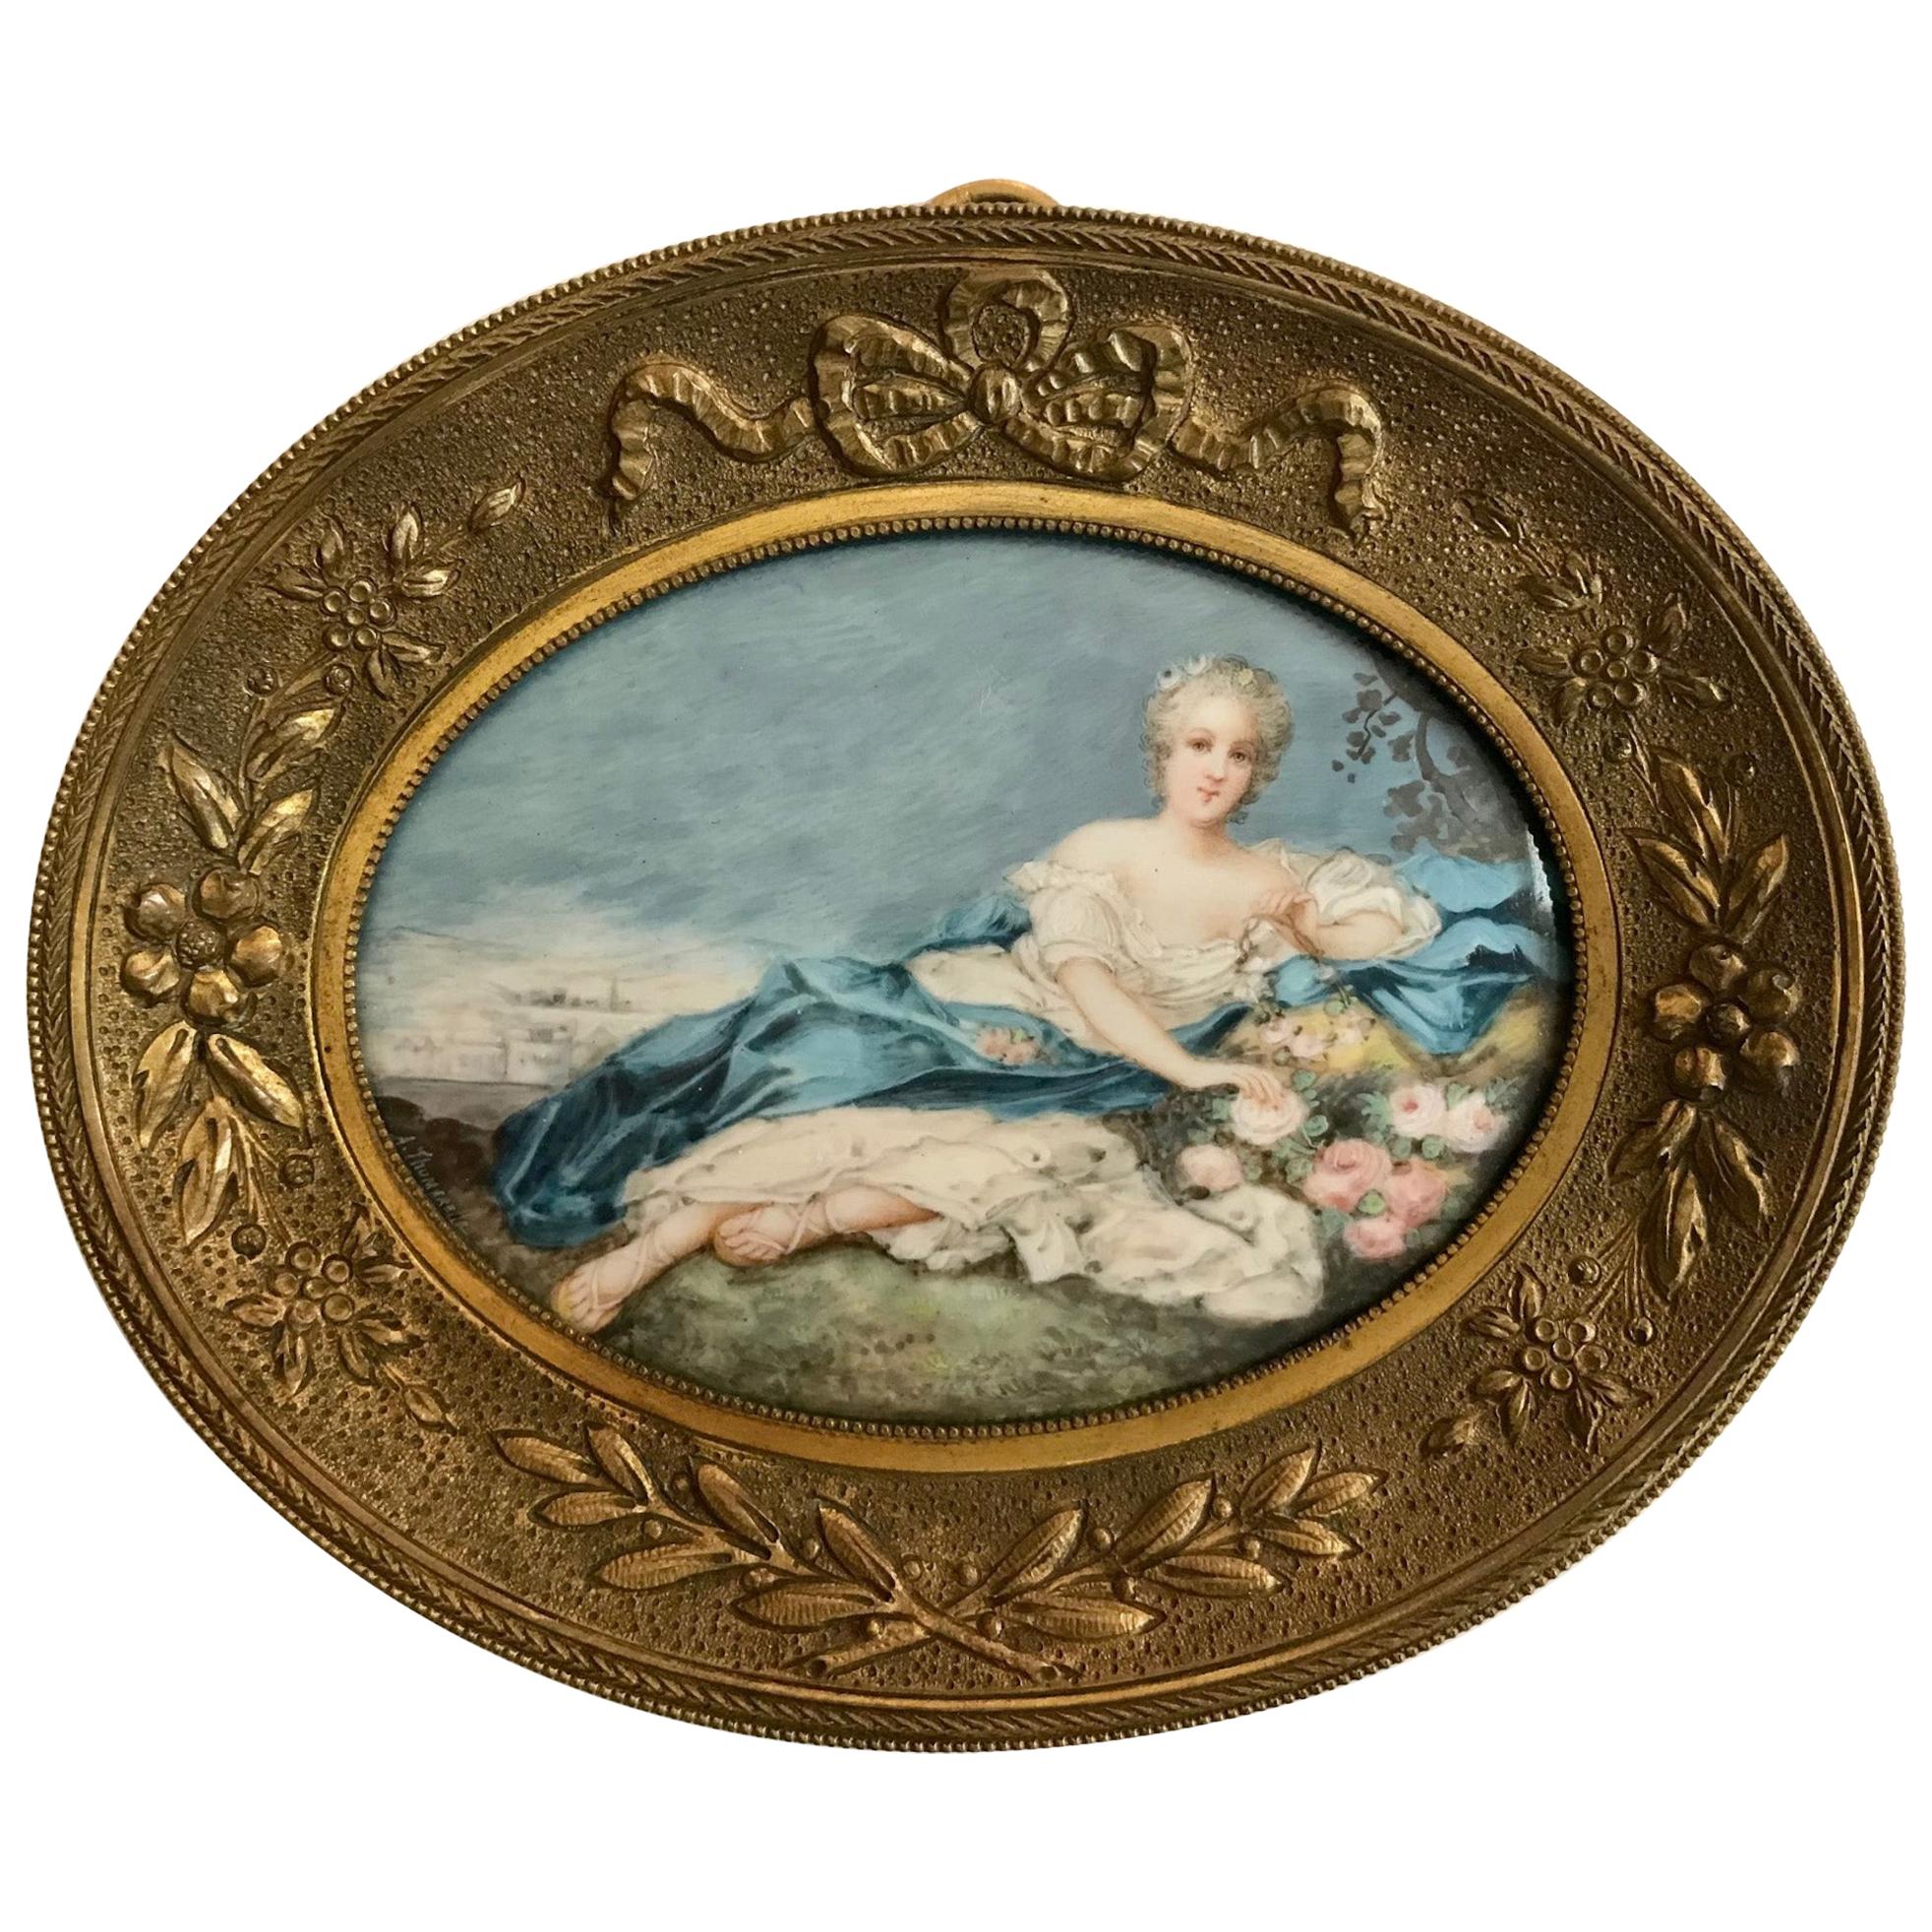 18th Century French Miniature Genre Painting in Ormolu Frame